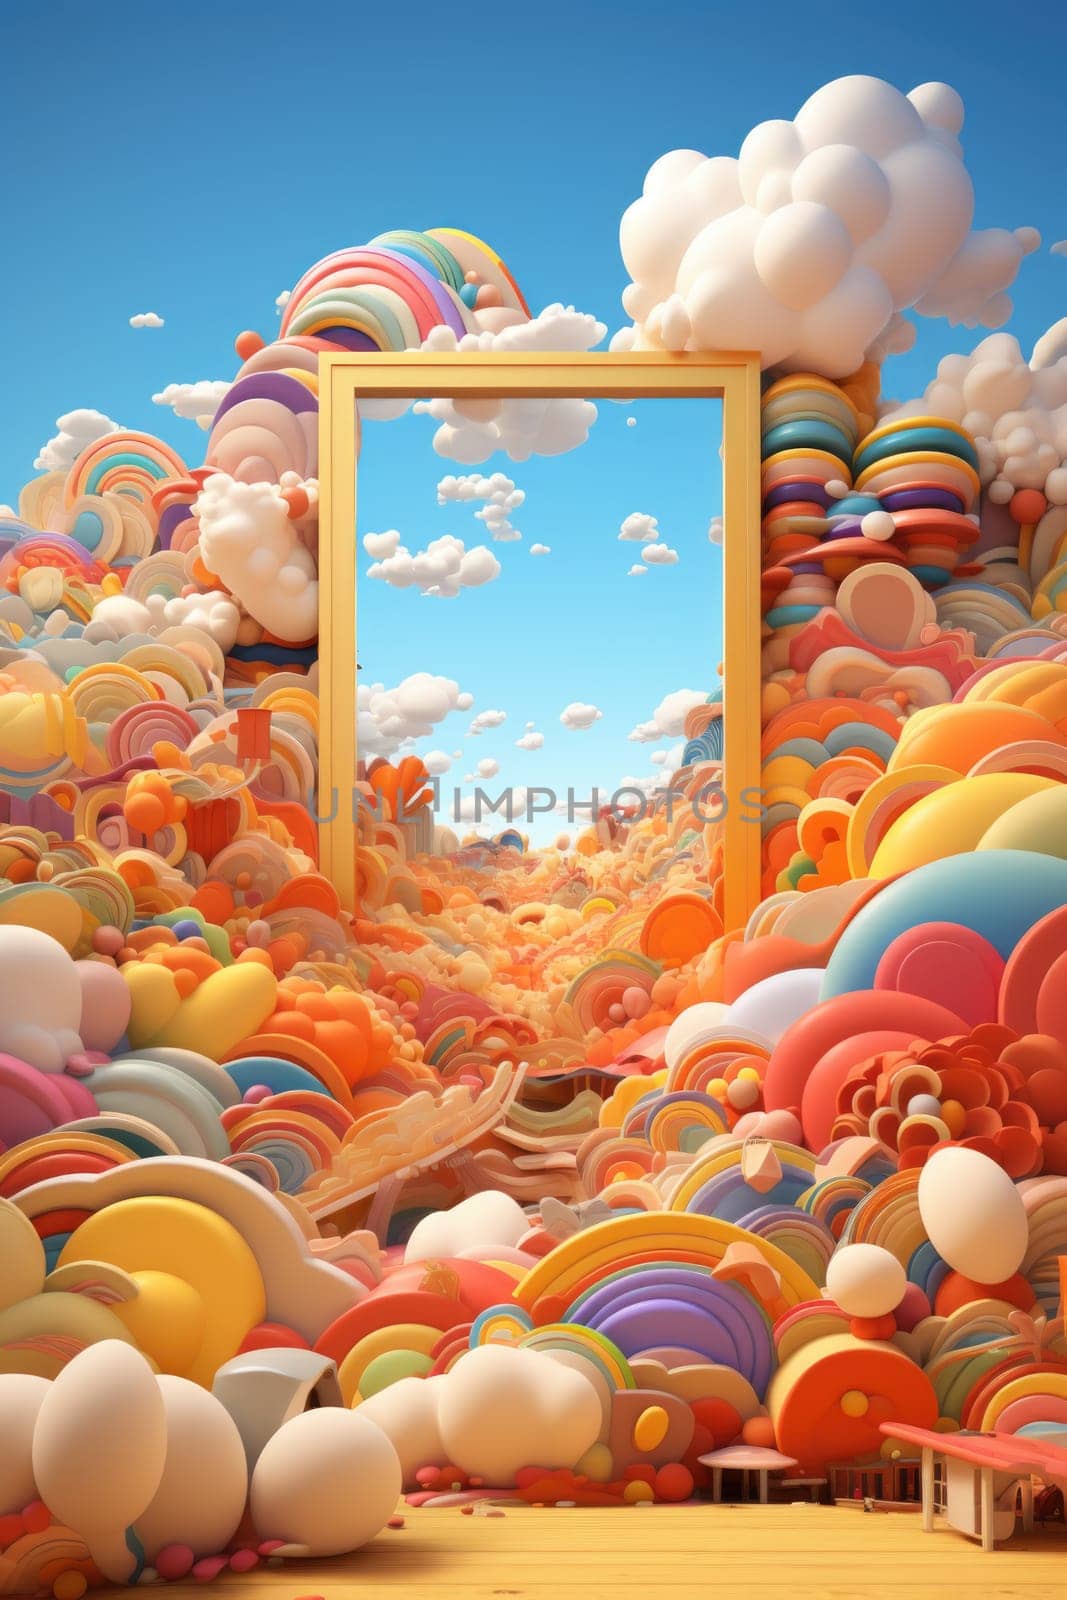 A frame with many colorful clouds in front of it